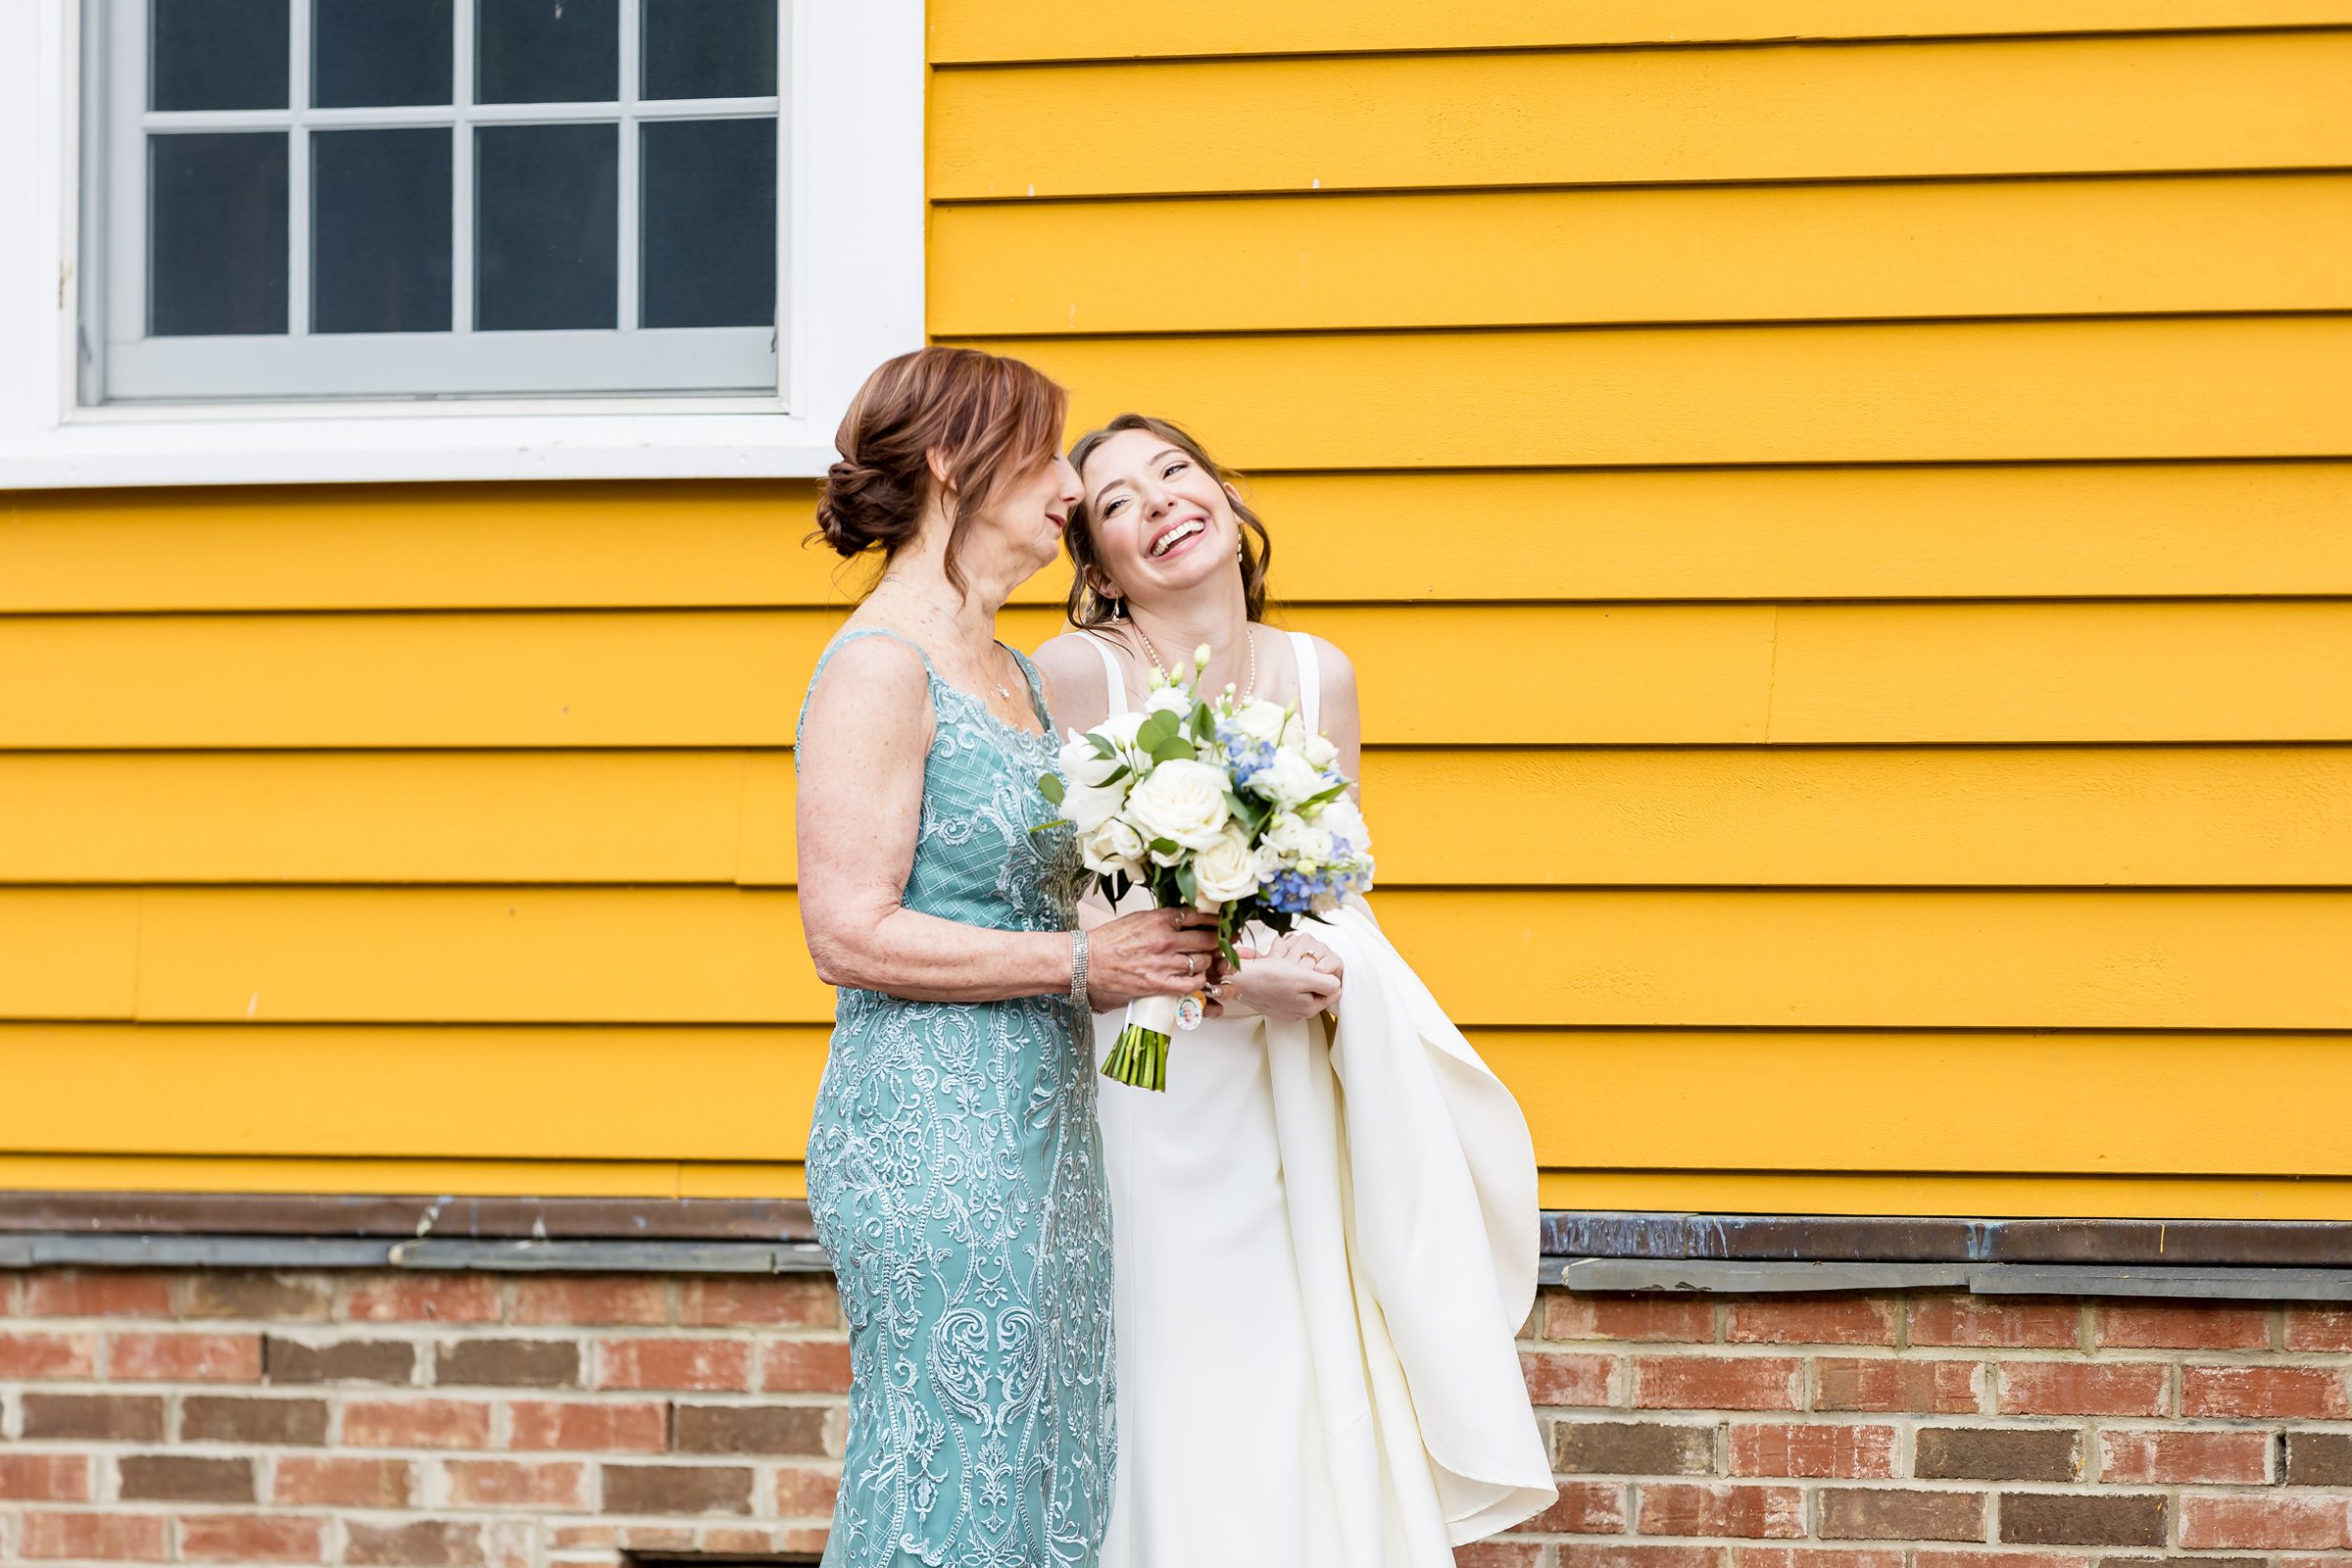 A woman in a green dress holds a bouquet while standing next to a smiling bride in a white dress in front of a yellow building.